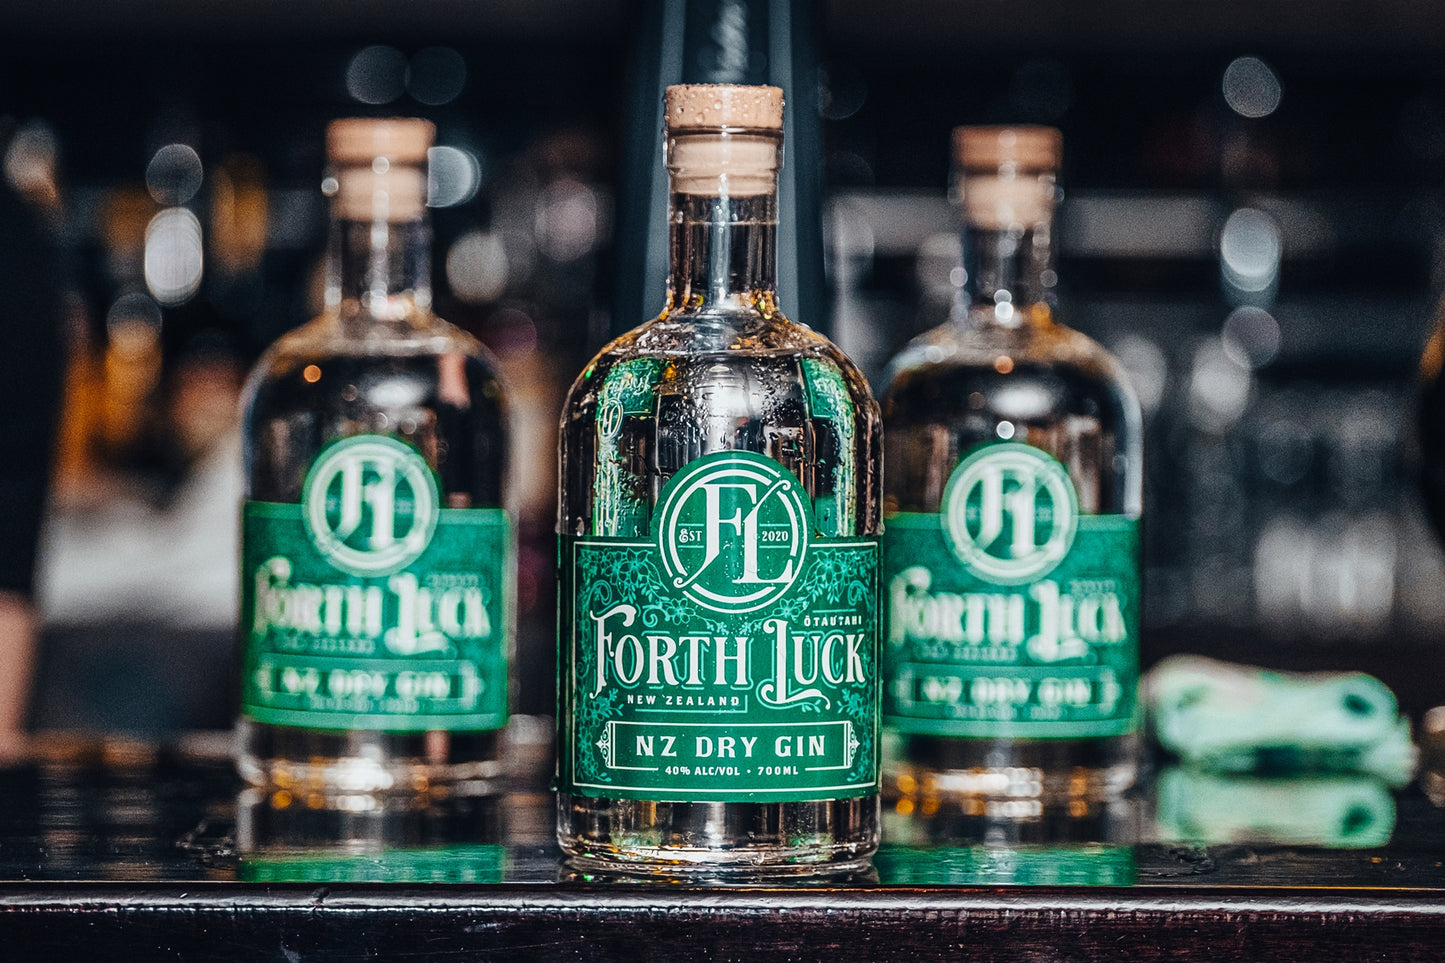 Forth Luck NZ dry New Zealand gin, London style